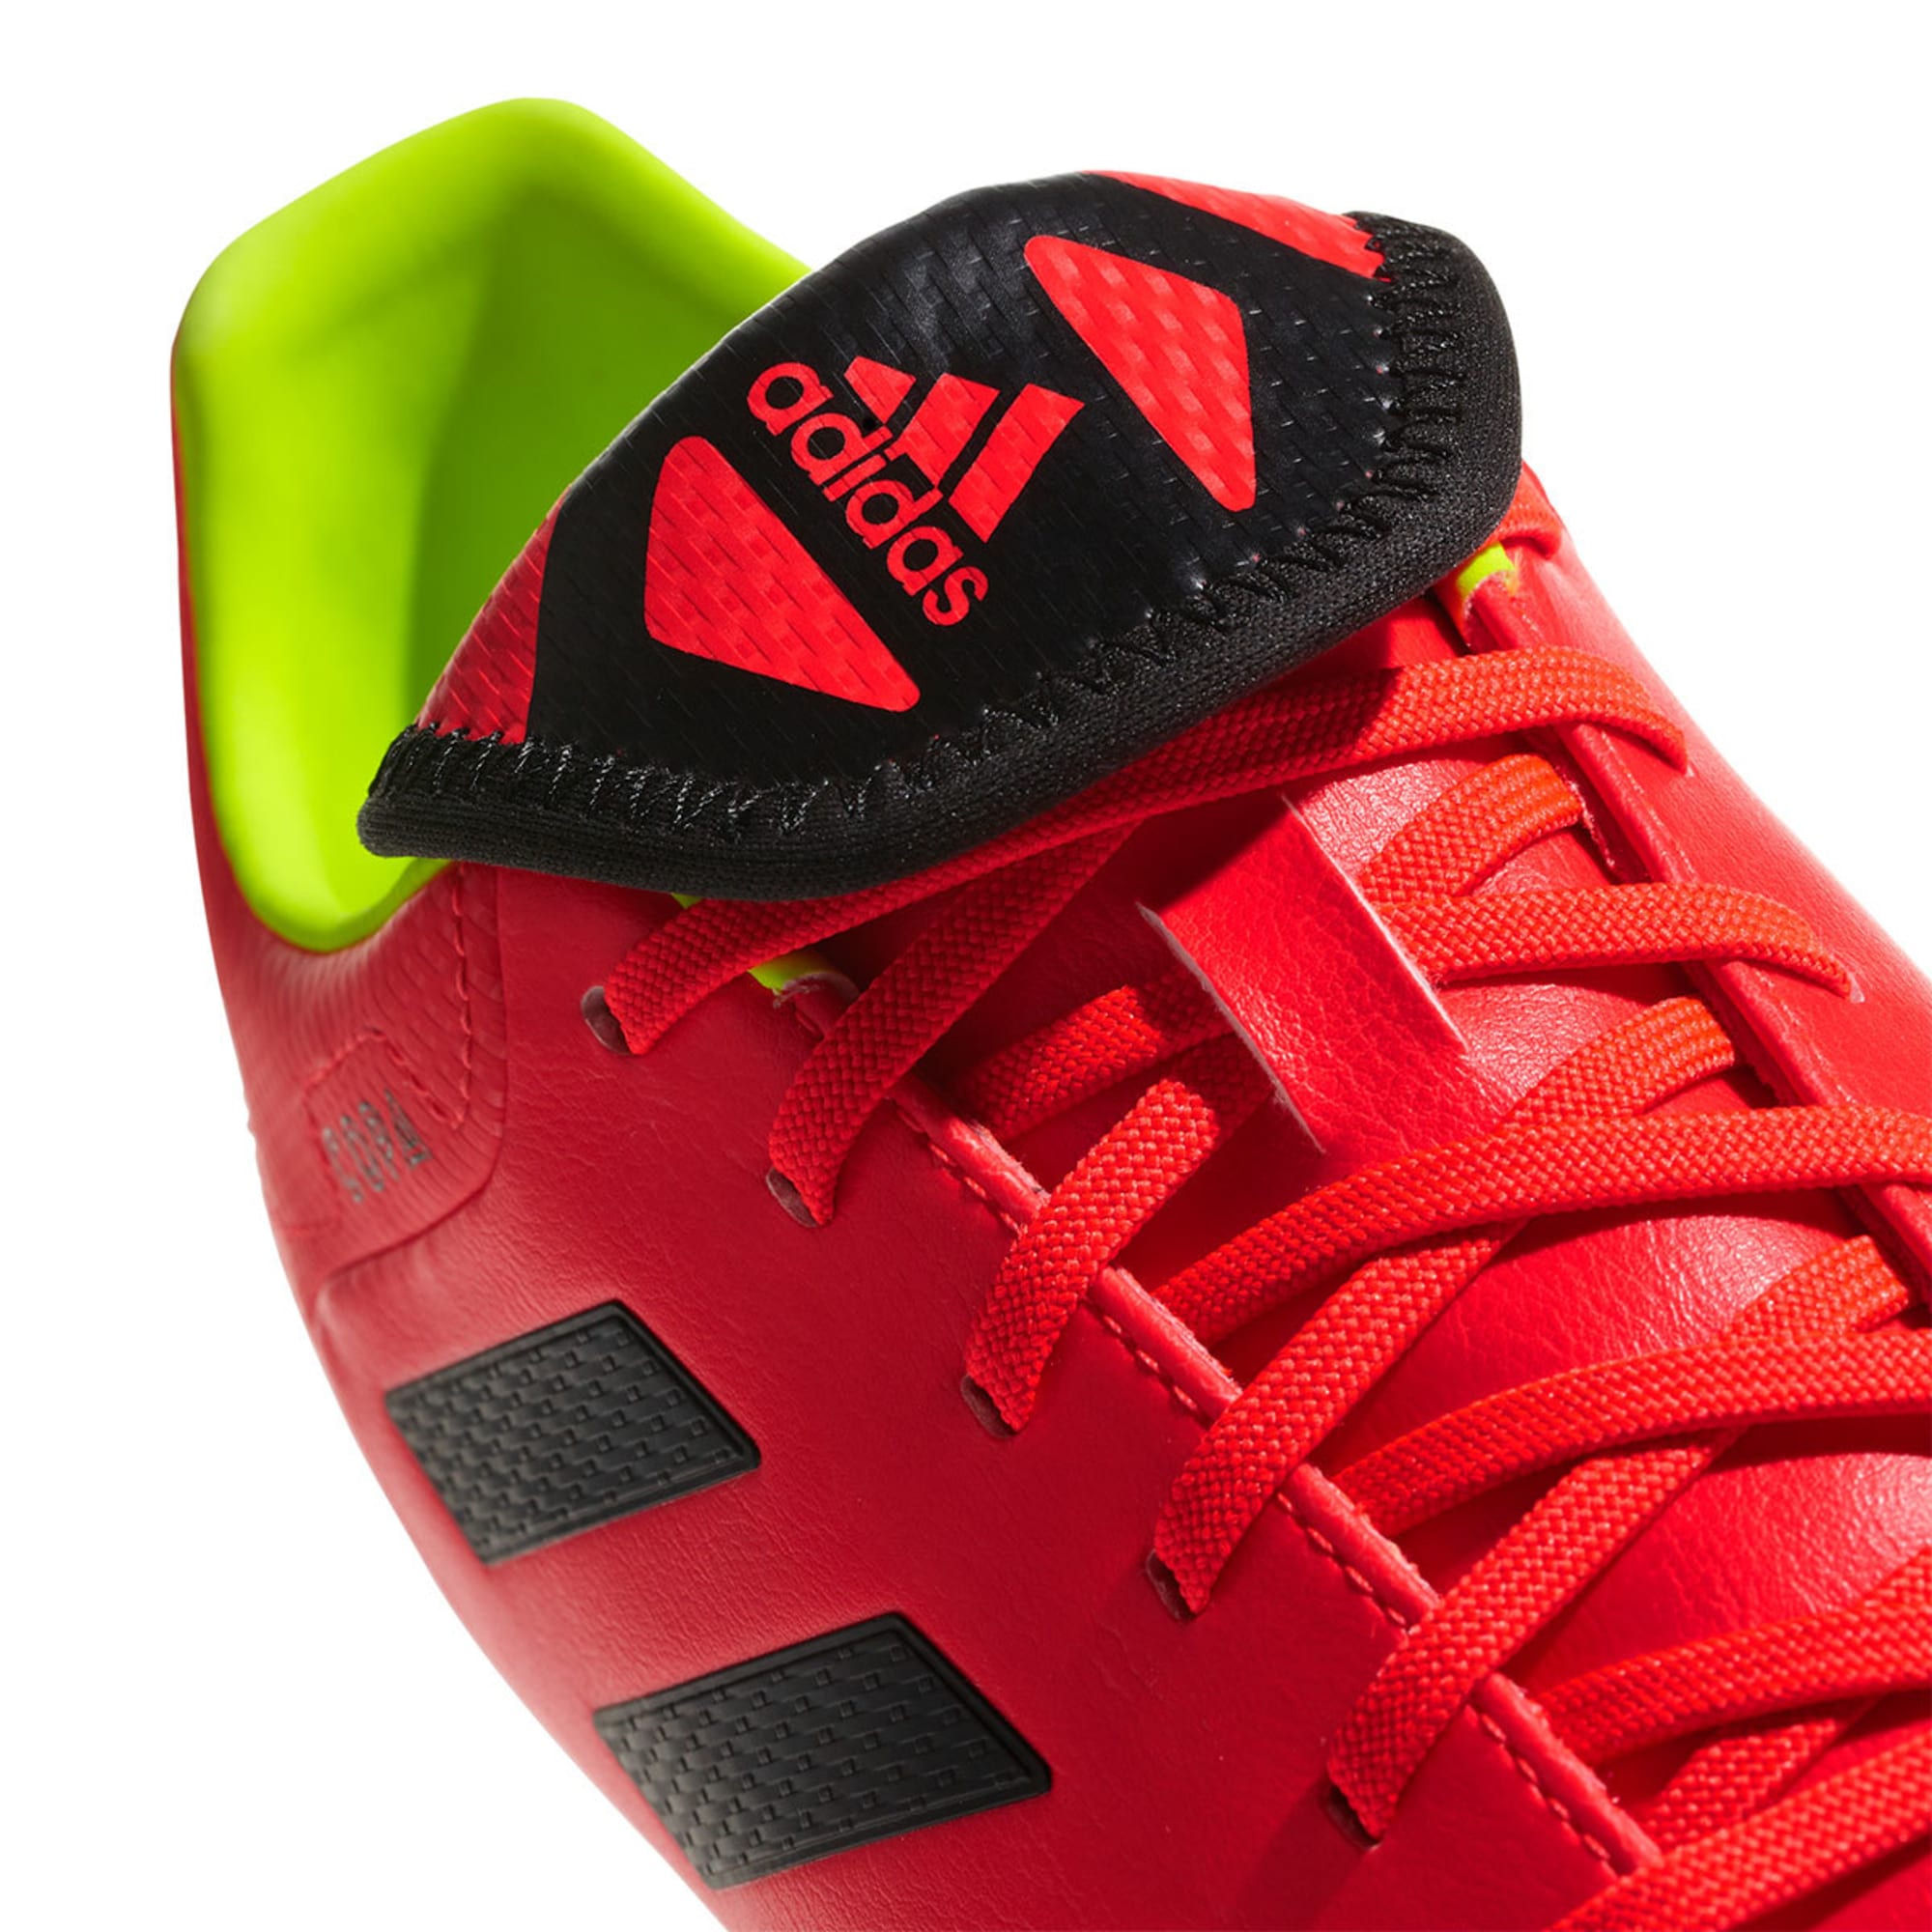 ADIDAS Men's Copa 18.3 Firm Ground Soccer Cleats - Bob's Stores